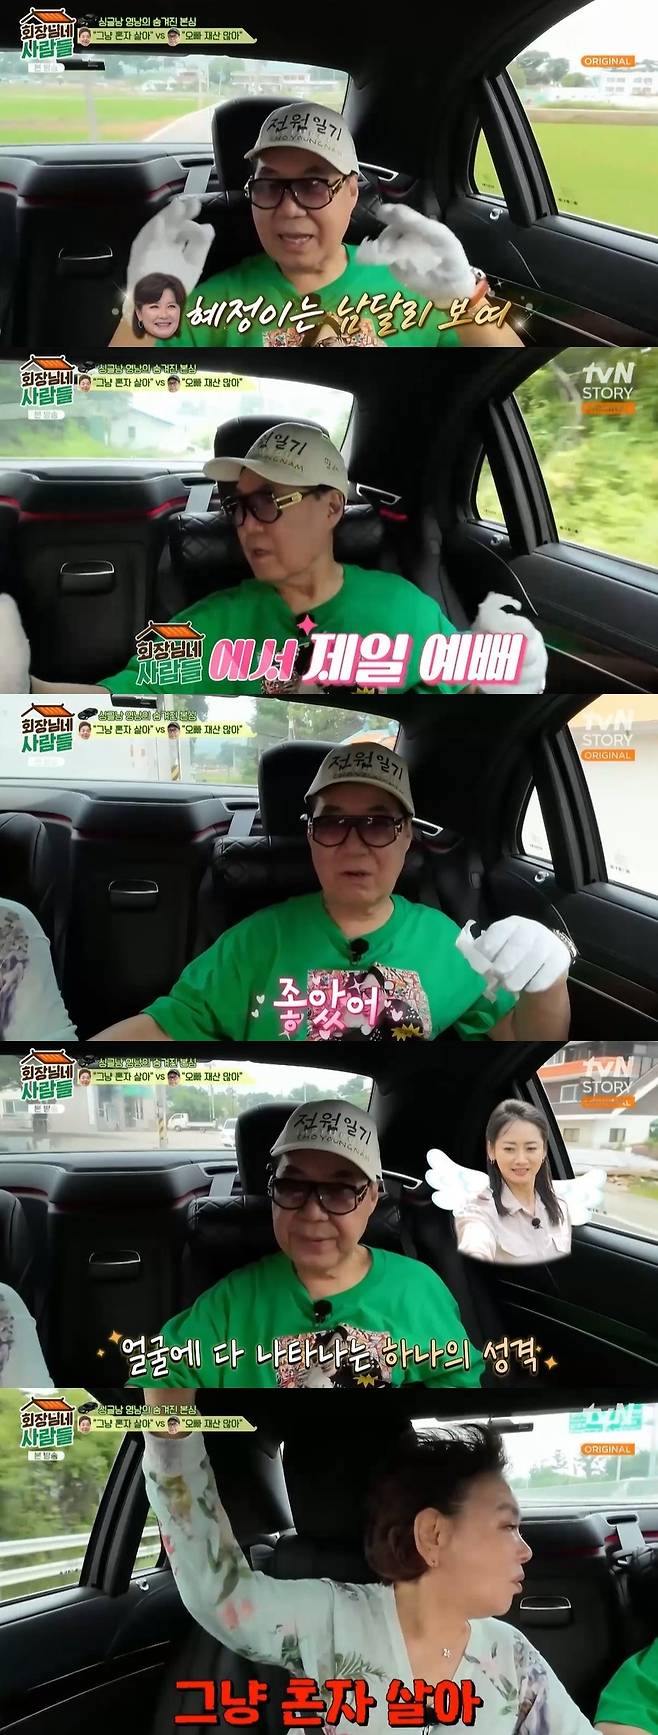 Cho Yeong-nam expressed his likability to Chairmans To or.Cho Yeong-nam appeared as a guest on tvN STORY entertainment Chairmans People broadcasted on July 31st.On this day, Cho Yeong-nam told me about the relationship with the family members of the Power Diary. Kim Hye-jung had introduced me a lot, but it did not happen. So hye jung-yi confessed that he seemed to be different.About To or, Cho Yeong-nam said, He is the most beautiful in this pro. He is so cute. Can you see him today?Cho Yeong-nam said, Please tell me well, this brother has a fortune and a personality. Kim Soo-mi said, He does not need money. He was a dancer and a college professor.Kim Soo-mi said, Hes a very nice kid, and he couldnt get married because he couldnt meet his partner and couldnt meet his time, not because he had a problem, and praised, I just missed my time because I was studying.Cho Yeong-nam, who listened to this, said, Tell me about it. I had a daughter, earned a certain amount of money, and died early.Kim Soo-mi said, I once had a rural bachelor. I have a sincere person. I do not have anything. Im pushing it with a half joke. What do I do if I hit my brother again? When my brother meets, I just watch the program because of Mr.I like to smile and advise you to do this much.Kim Soo-mi said, I just live alone. If I meet you now, I have nothing to do. Think carefully. I always talk about it with my brother. Now I have to go to the hospital because I am sick. Just live alone.Dont get married and get married, he said.On the other hand, Cho Yeong-nam met To or and tried to get acquainted with It is beautiful to laugh.